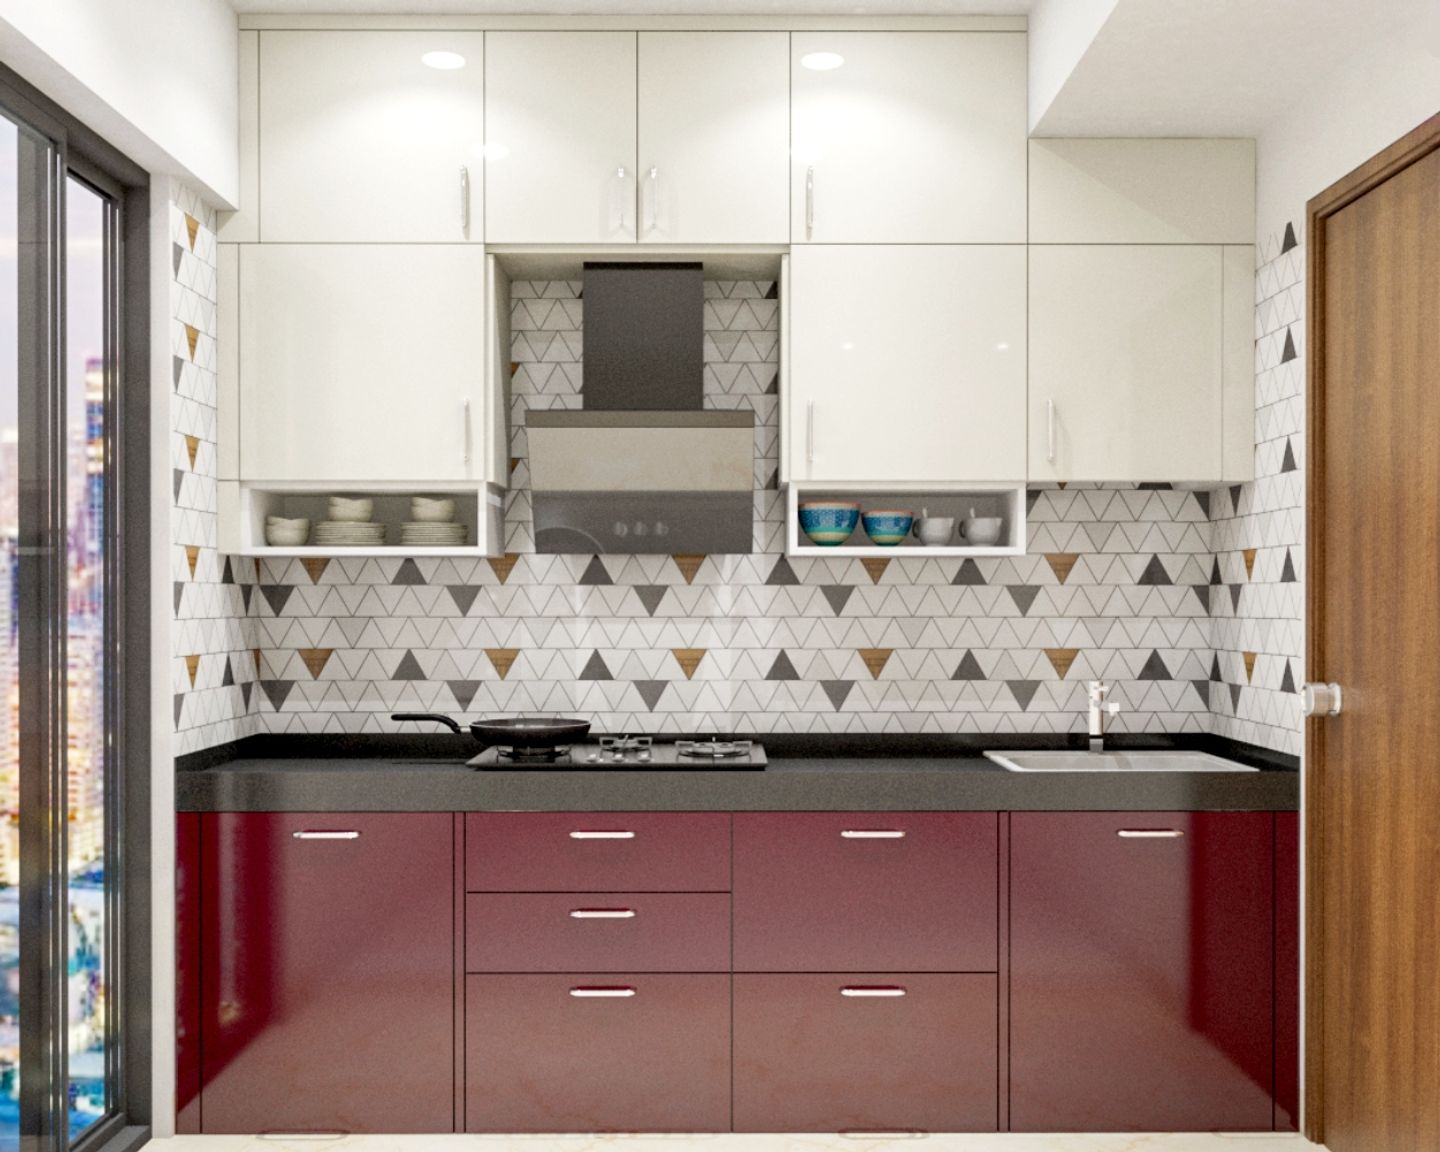 Modular Carnival Red And White Parallel Kitchen Design - Livspace